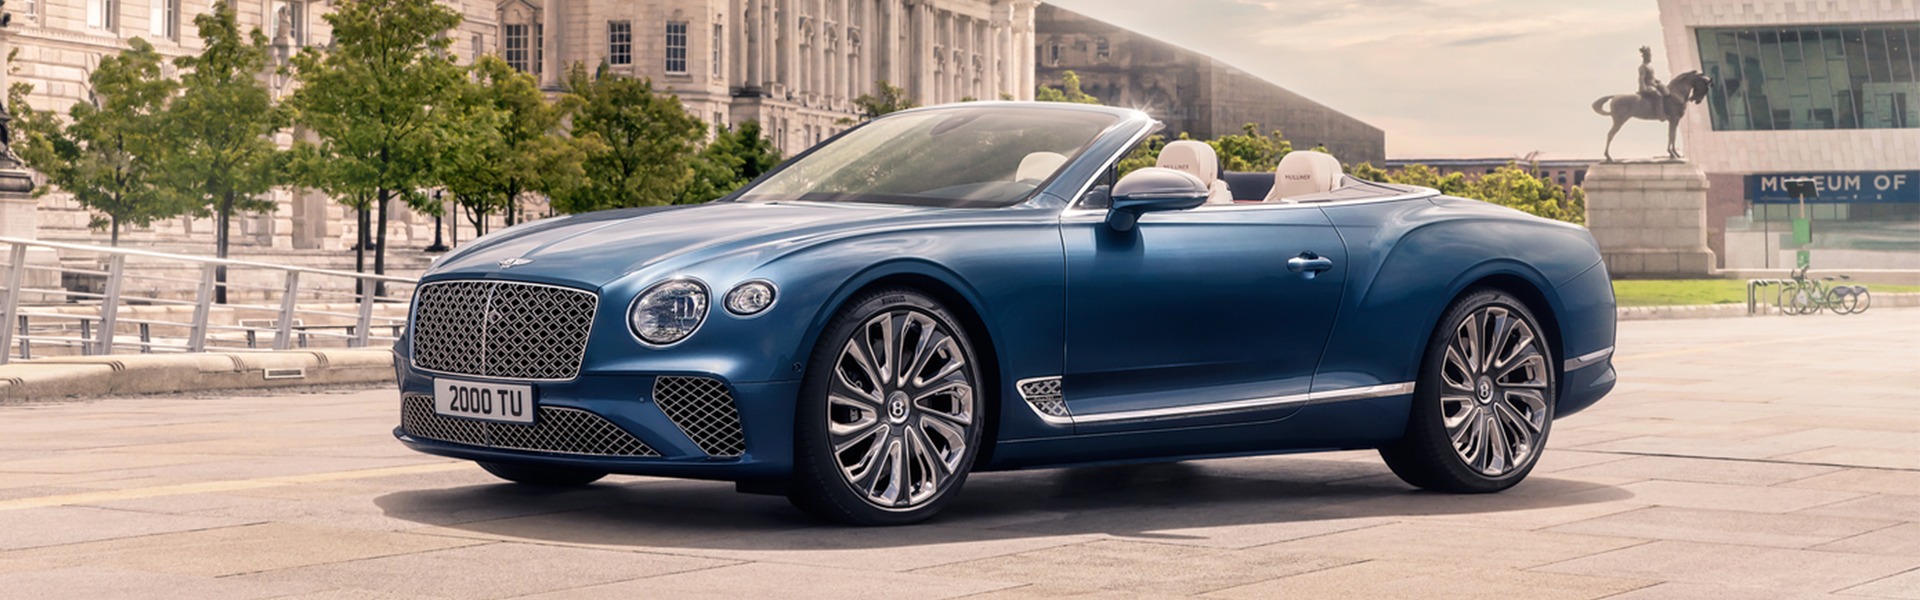 CONTINENTAL GT MULLINER CONVERTIBLE